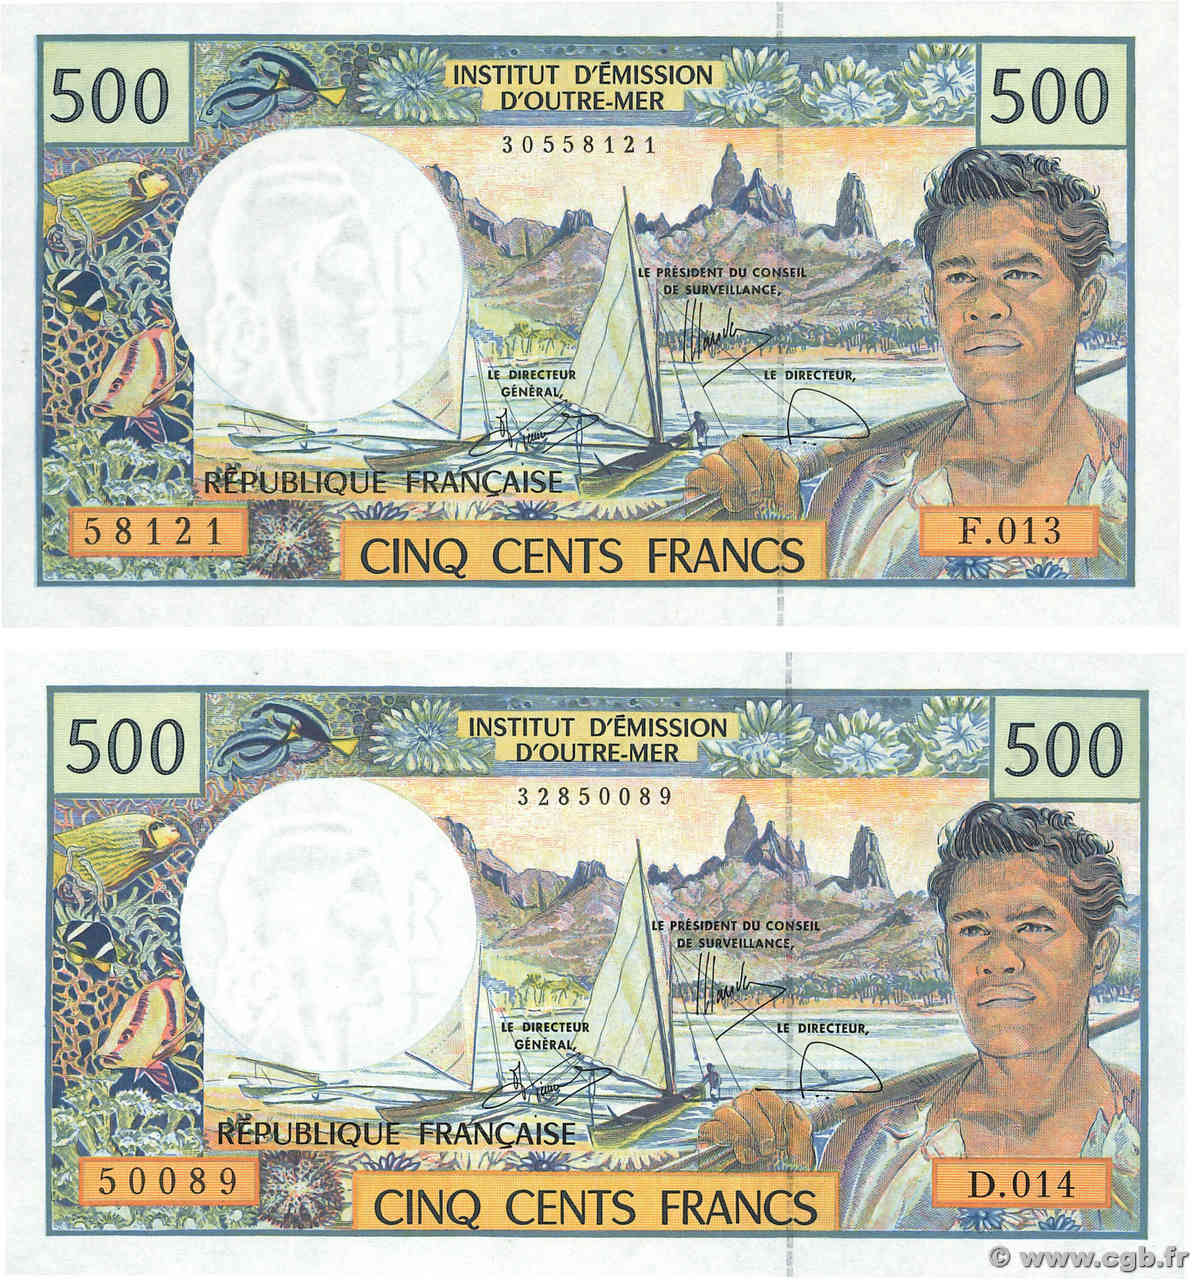 500 Francs Lot FRENCH PACIFIC TERRITORIES  2000 P.01f UNC